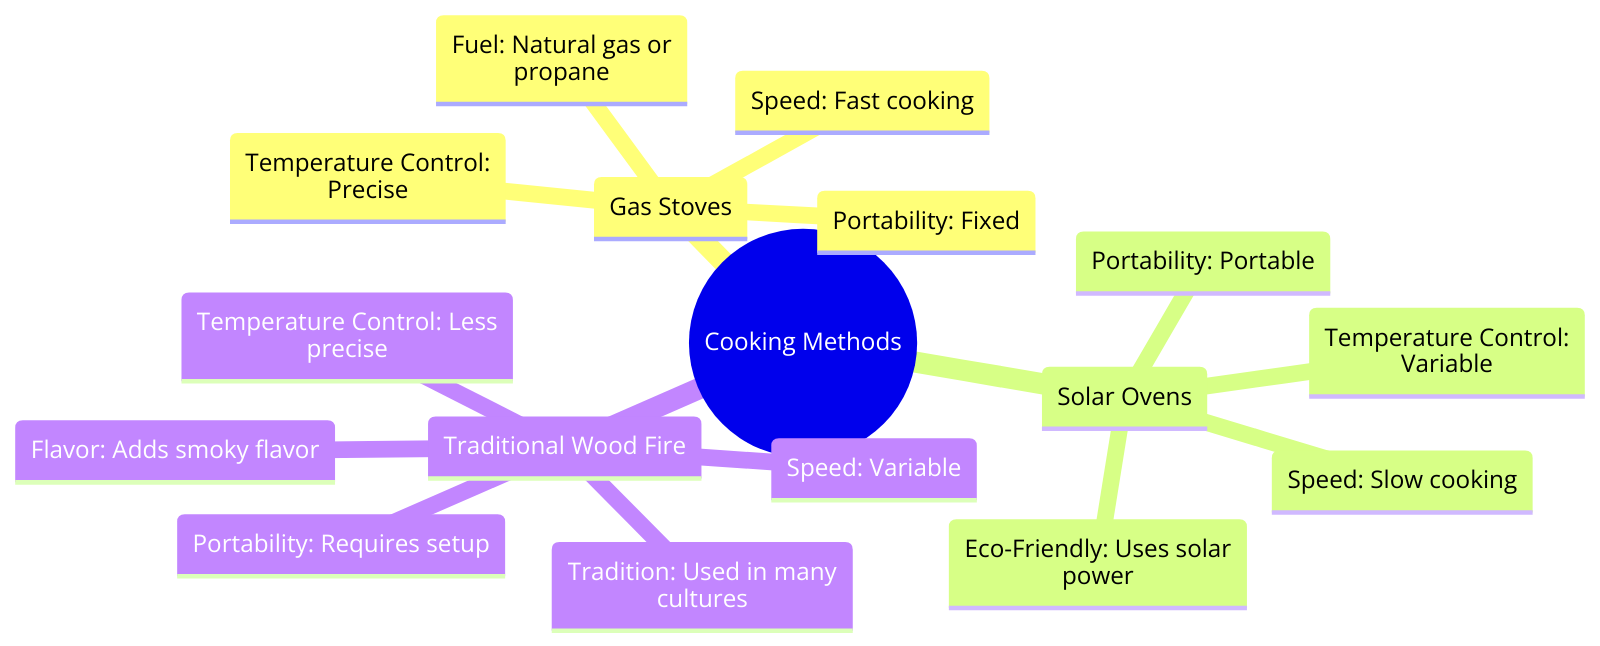 the functionality between gas stoves, solar ovens, and traditional wood fire cooking